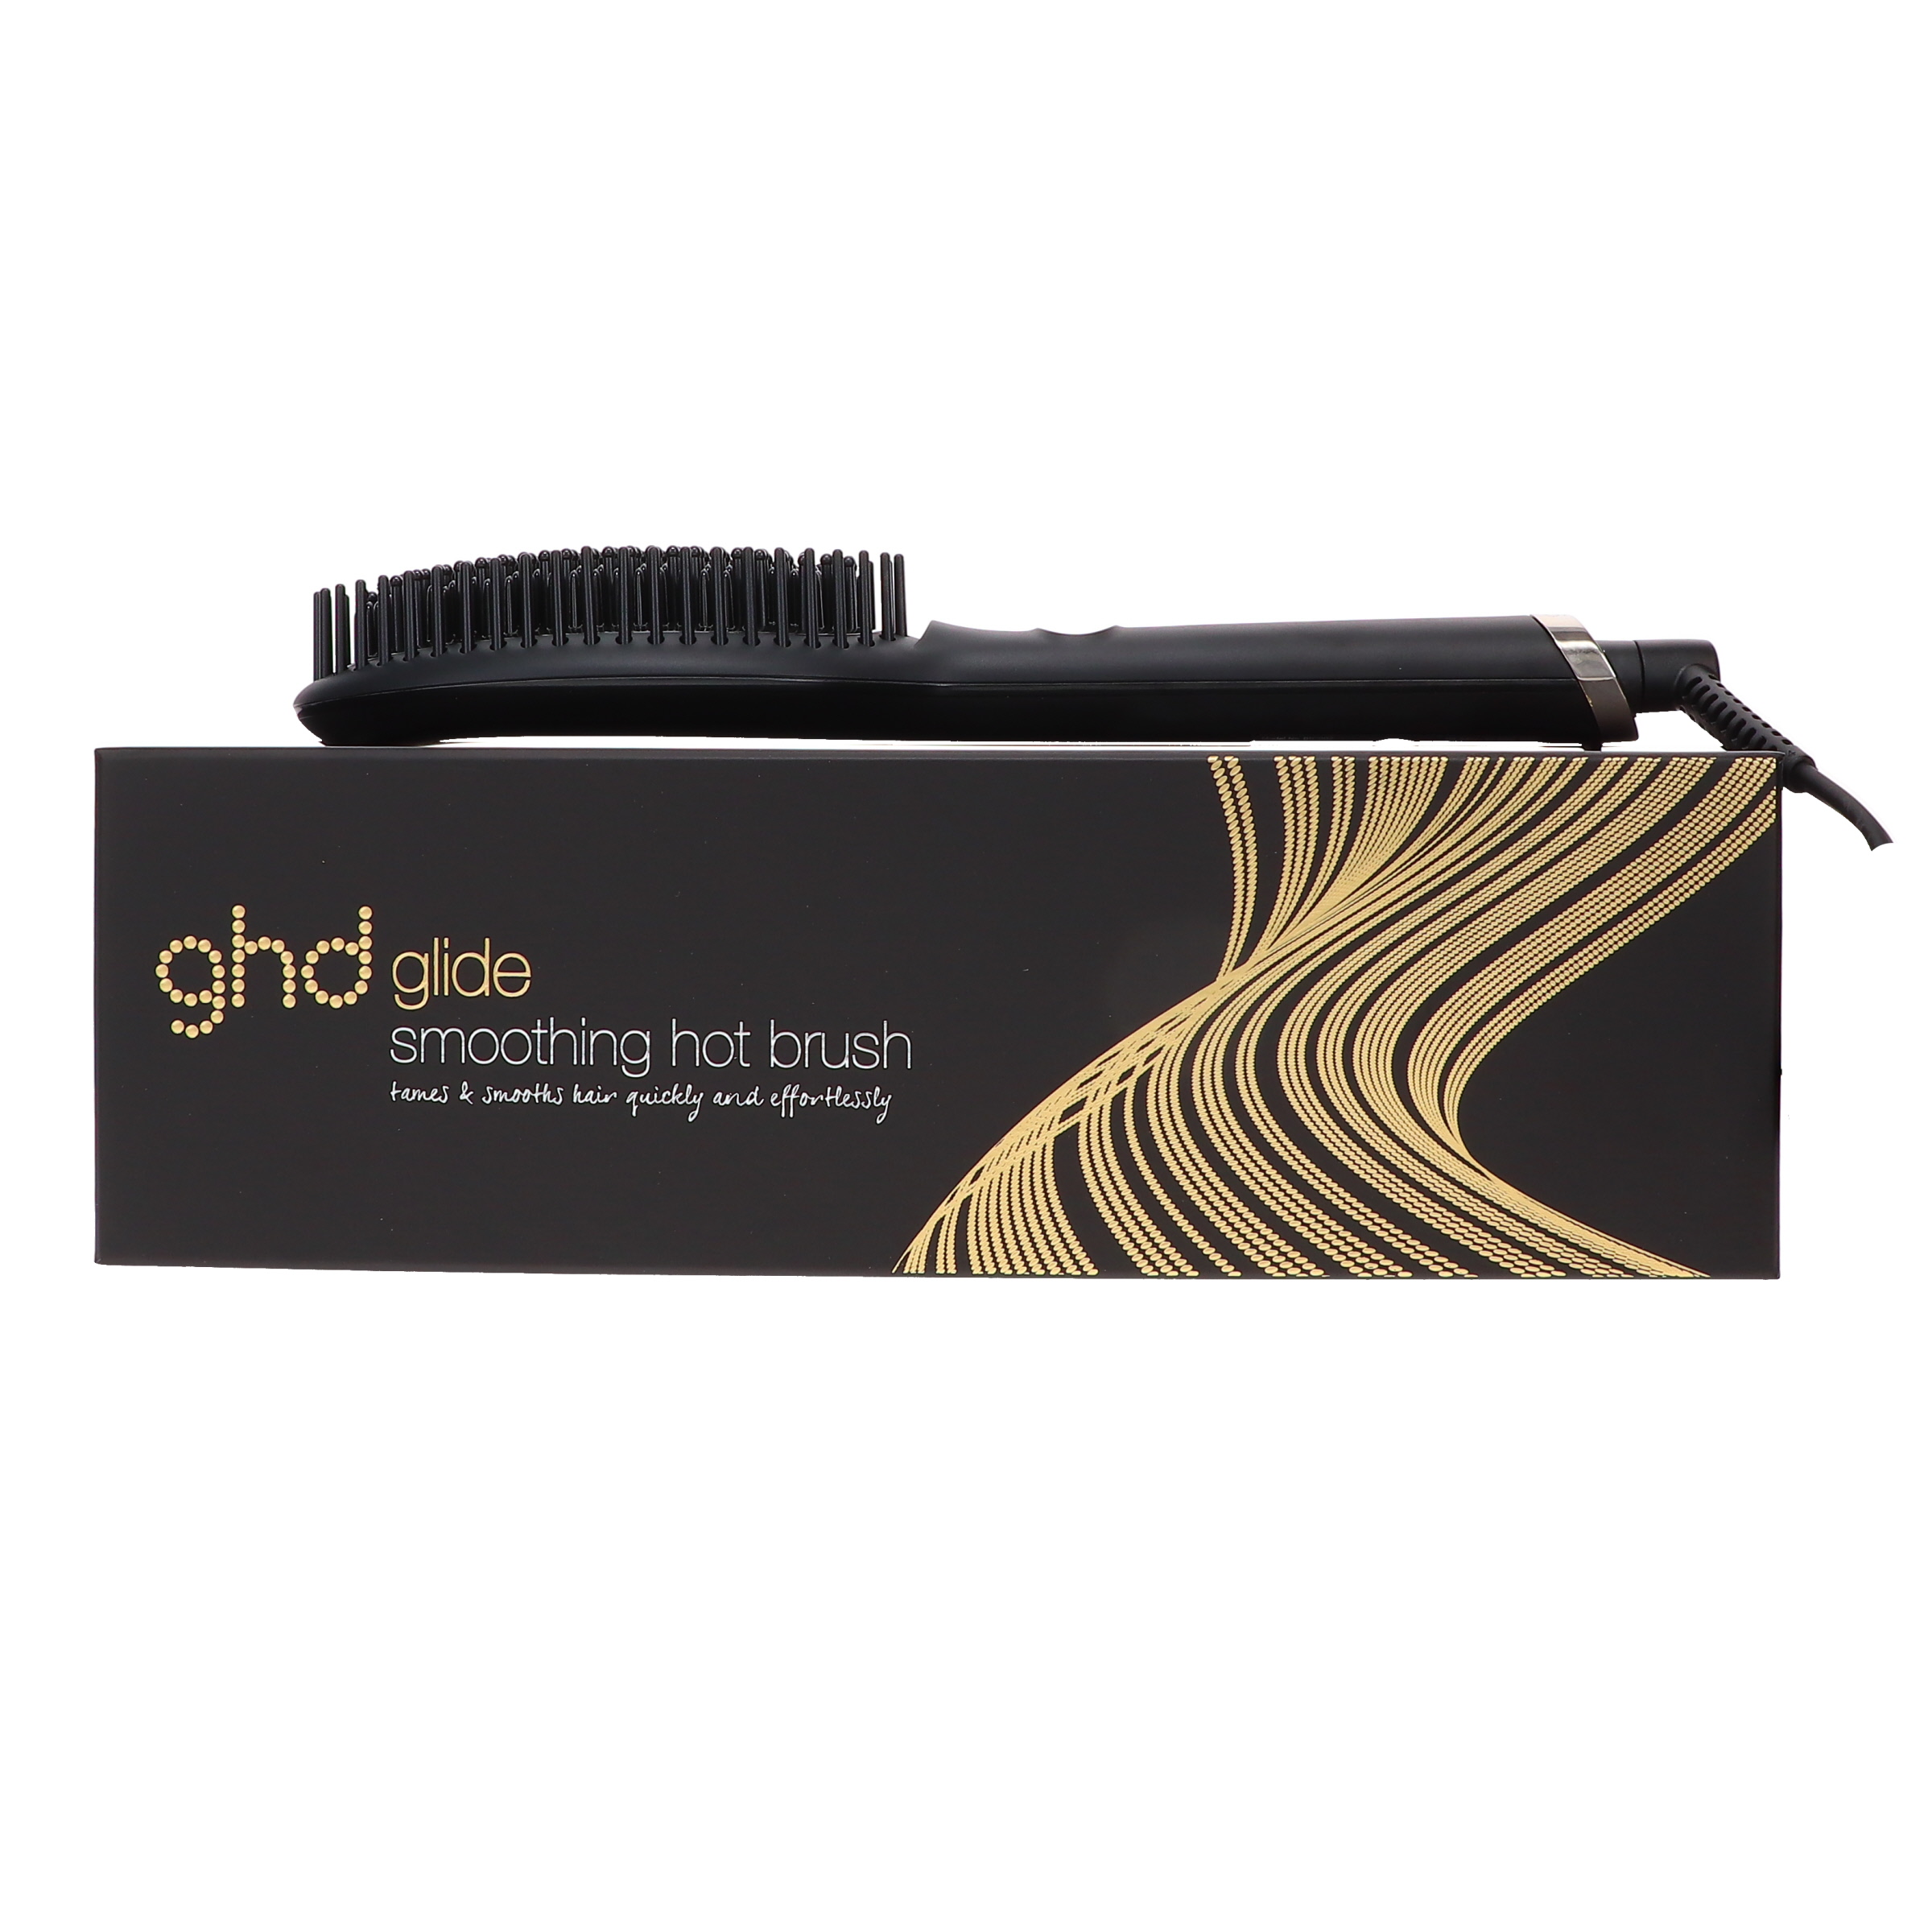 GHD Helios Ergonomic Design Hair Dryer with Concentrator, White - image 5 of 6